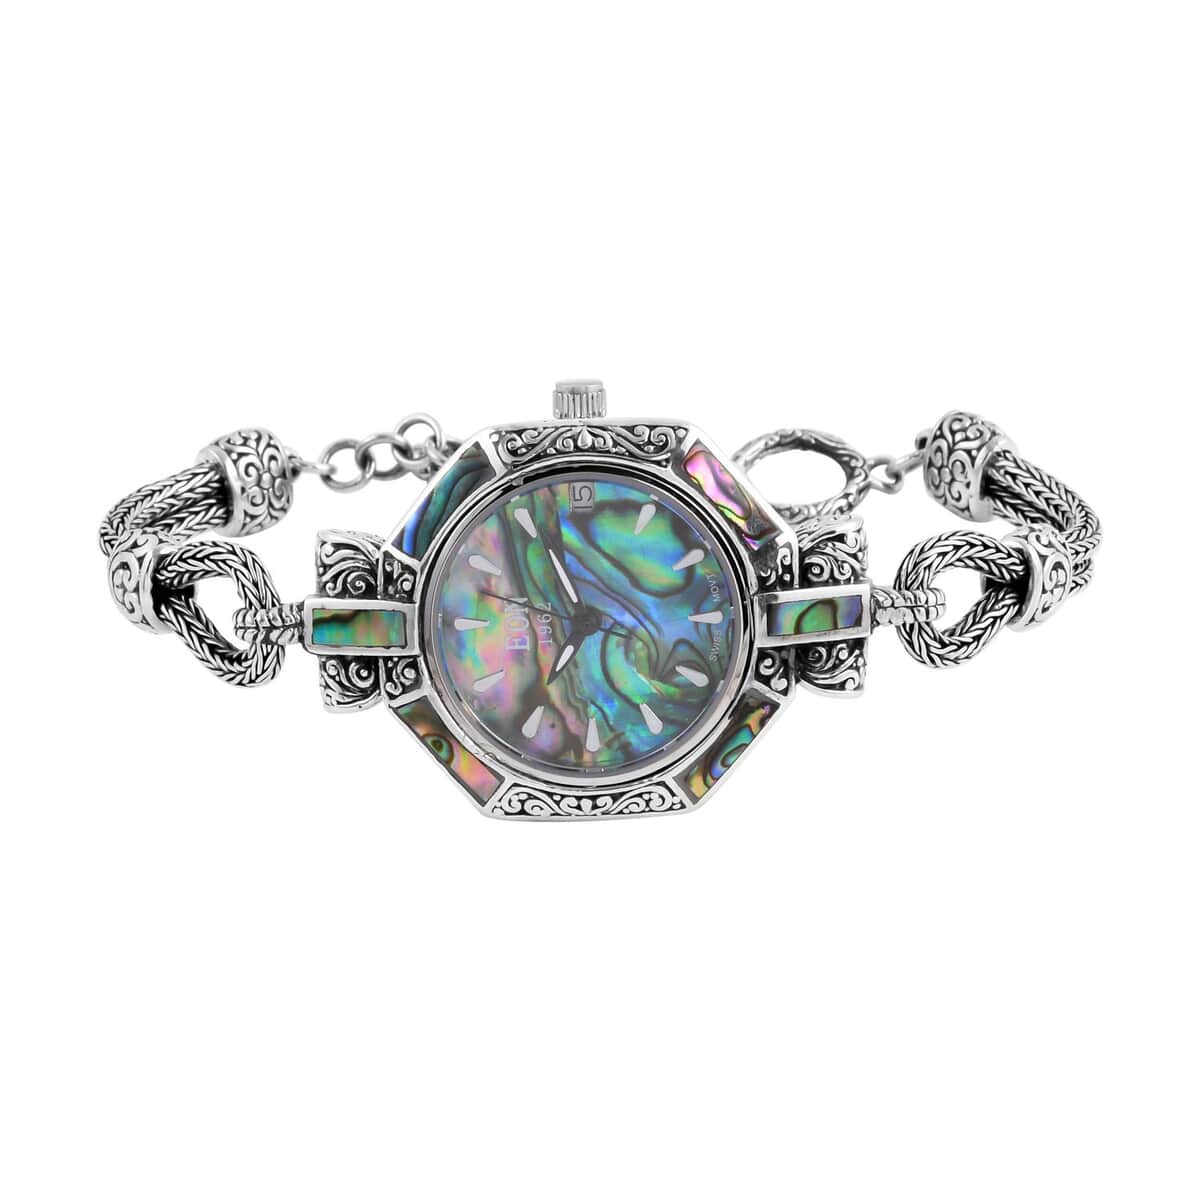 Bali Legacy Eon 1962 Abalone Shell Swiss Movement Sterling Silver Bracelet Watch (7.50-8.00 In) (26mm) image number 3